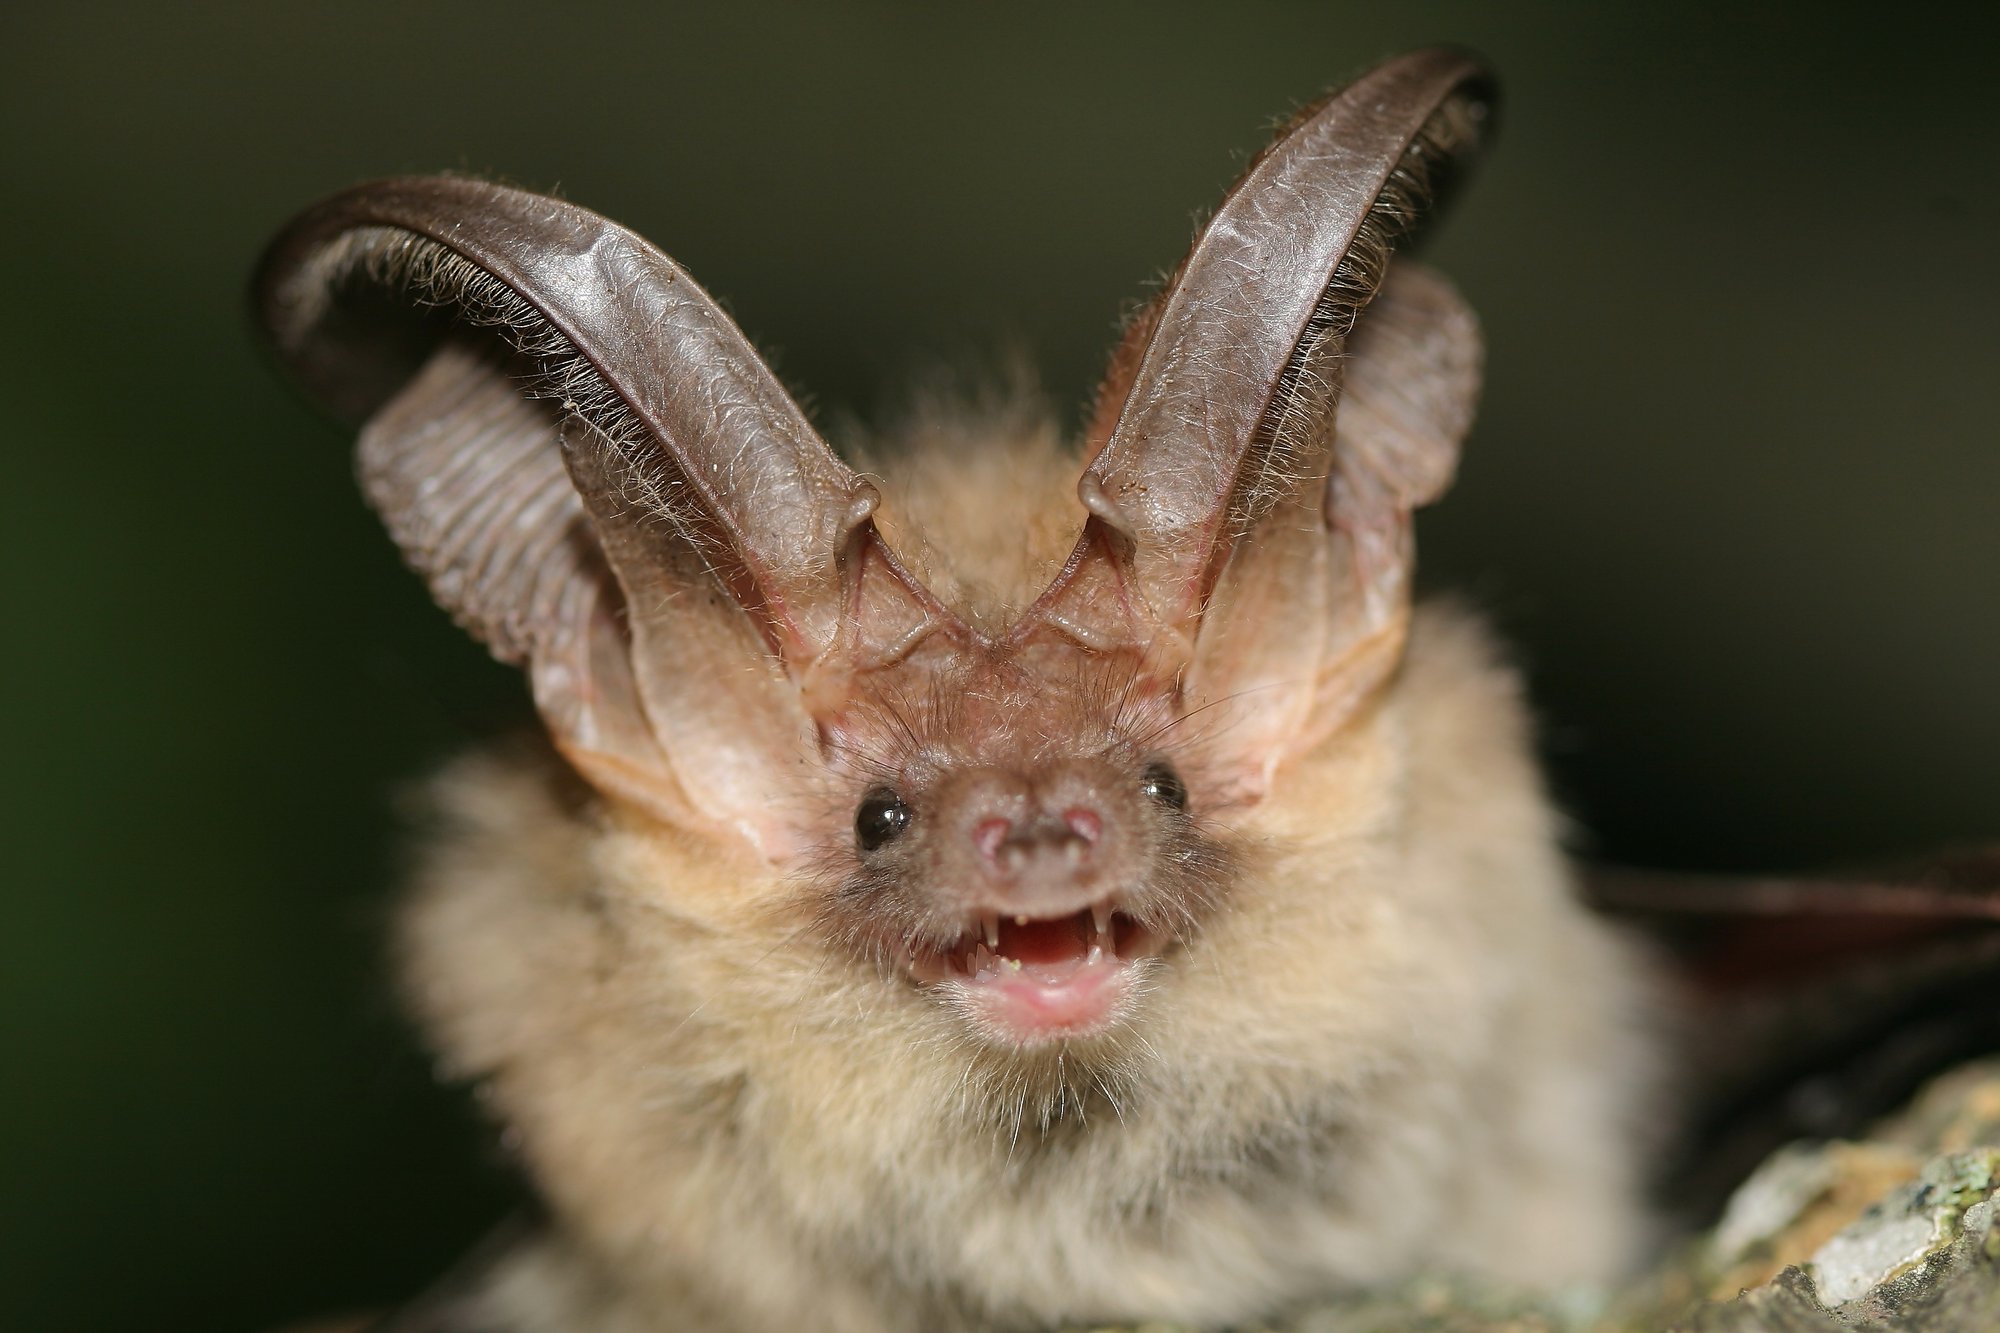 Applied Genomics, eDNA, biodiversity, detect species from faeces, image of a bat